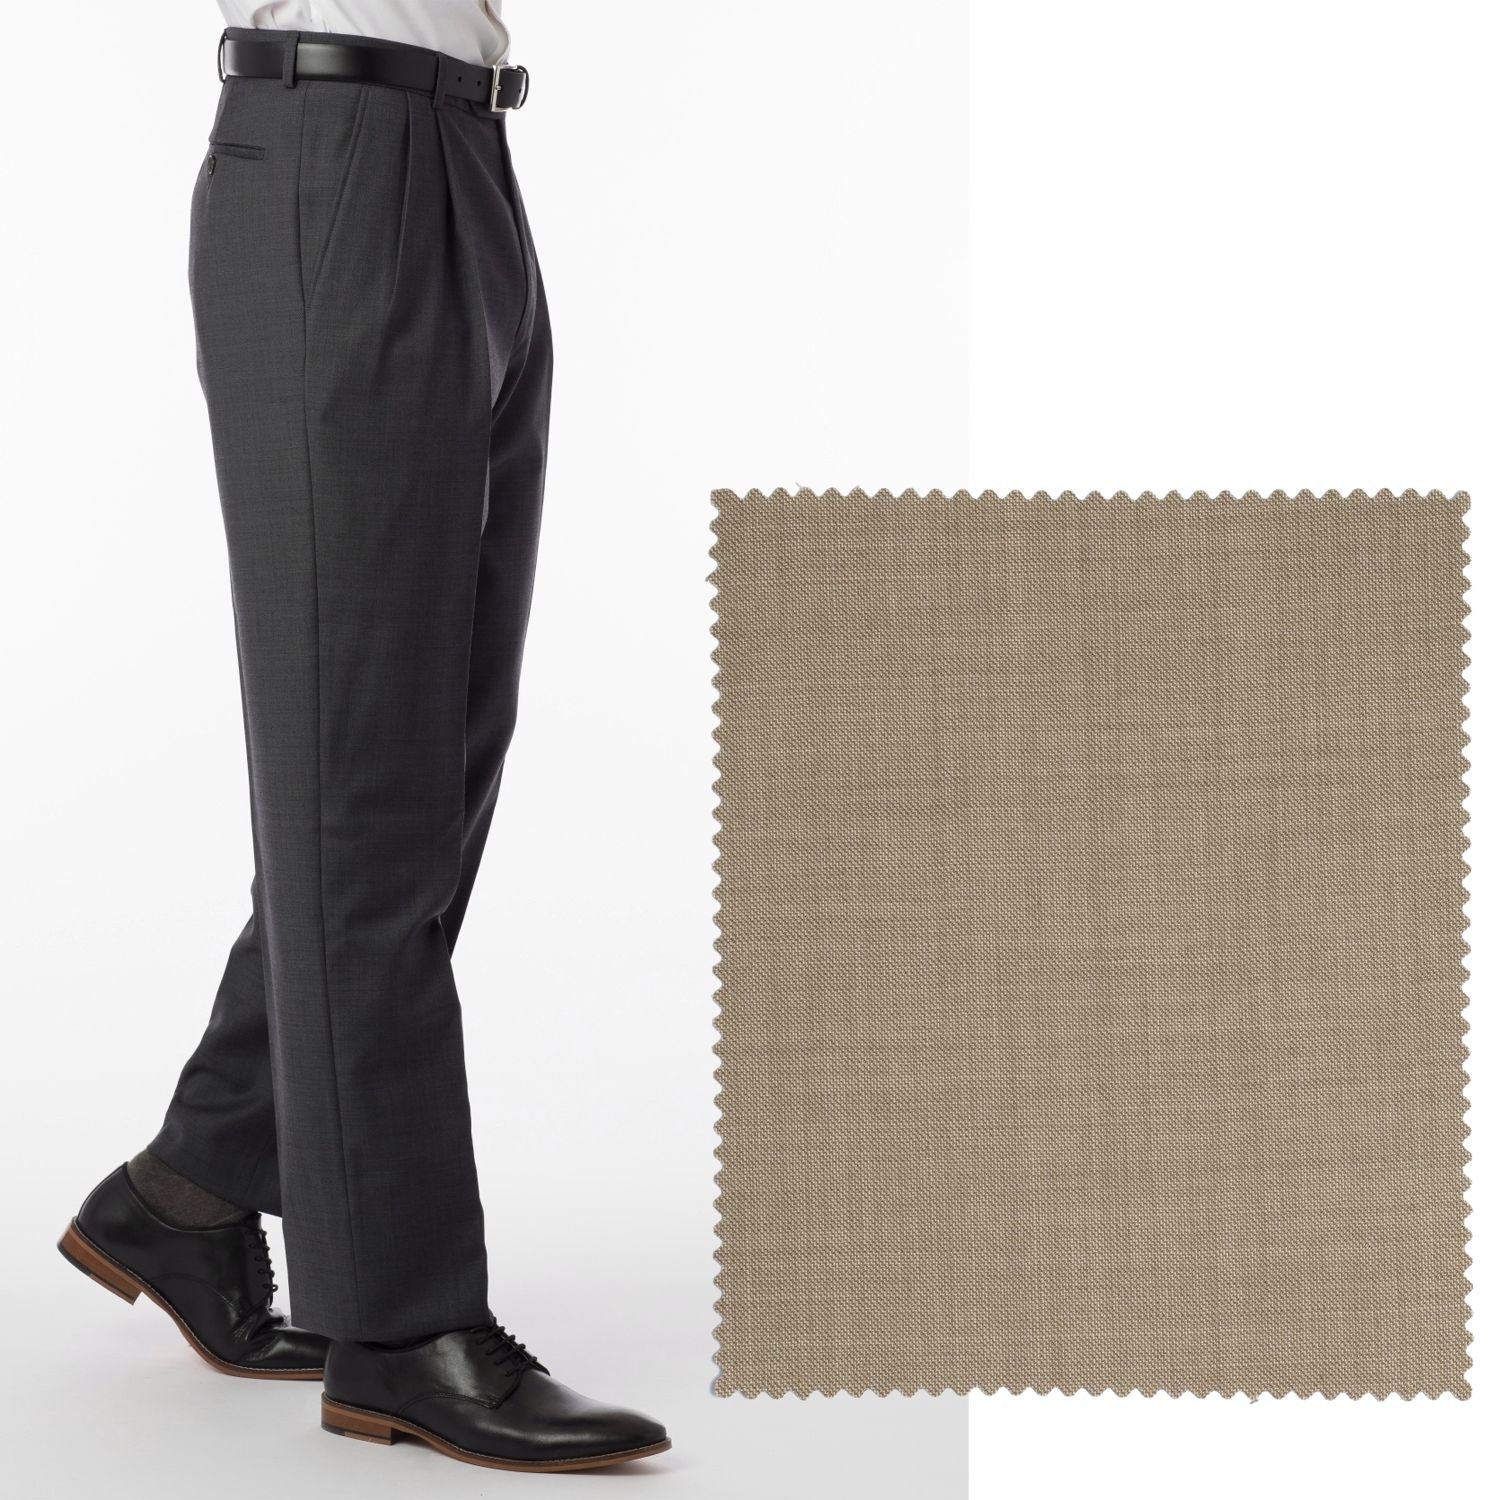 BIG FIT Sharkskin Super 120s Worsted Wool Comfort-EZE Trouser in Camel (Manchester Pleated Model) by Ballin